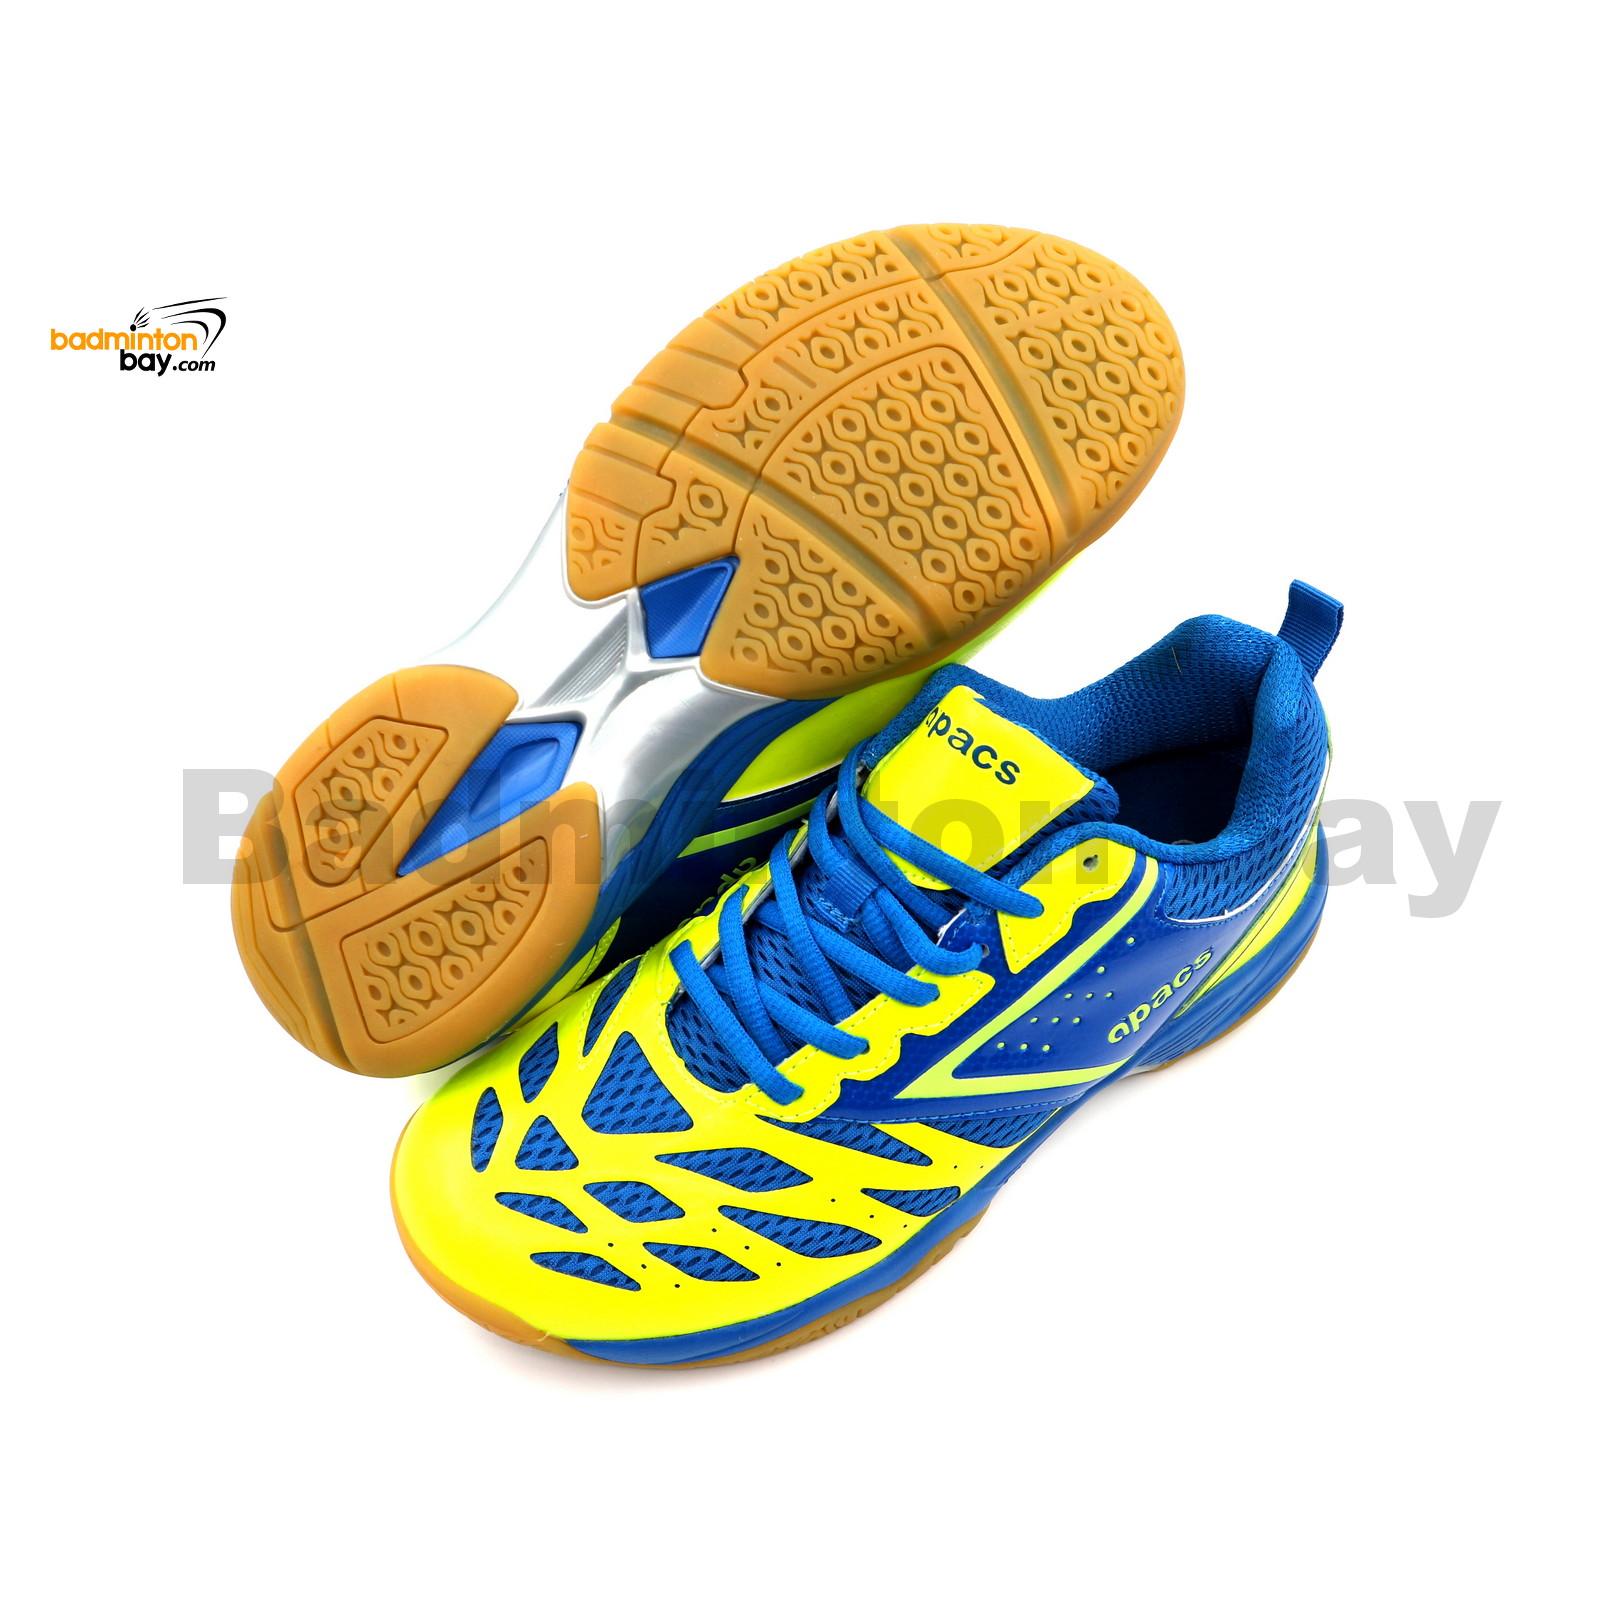 Apacs Cushion Power 081 Neon Green Blue Badminton Shoes With Improved ...